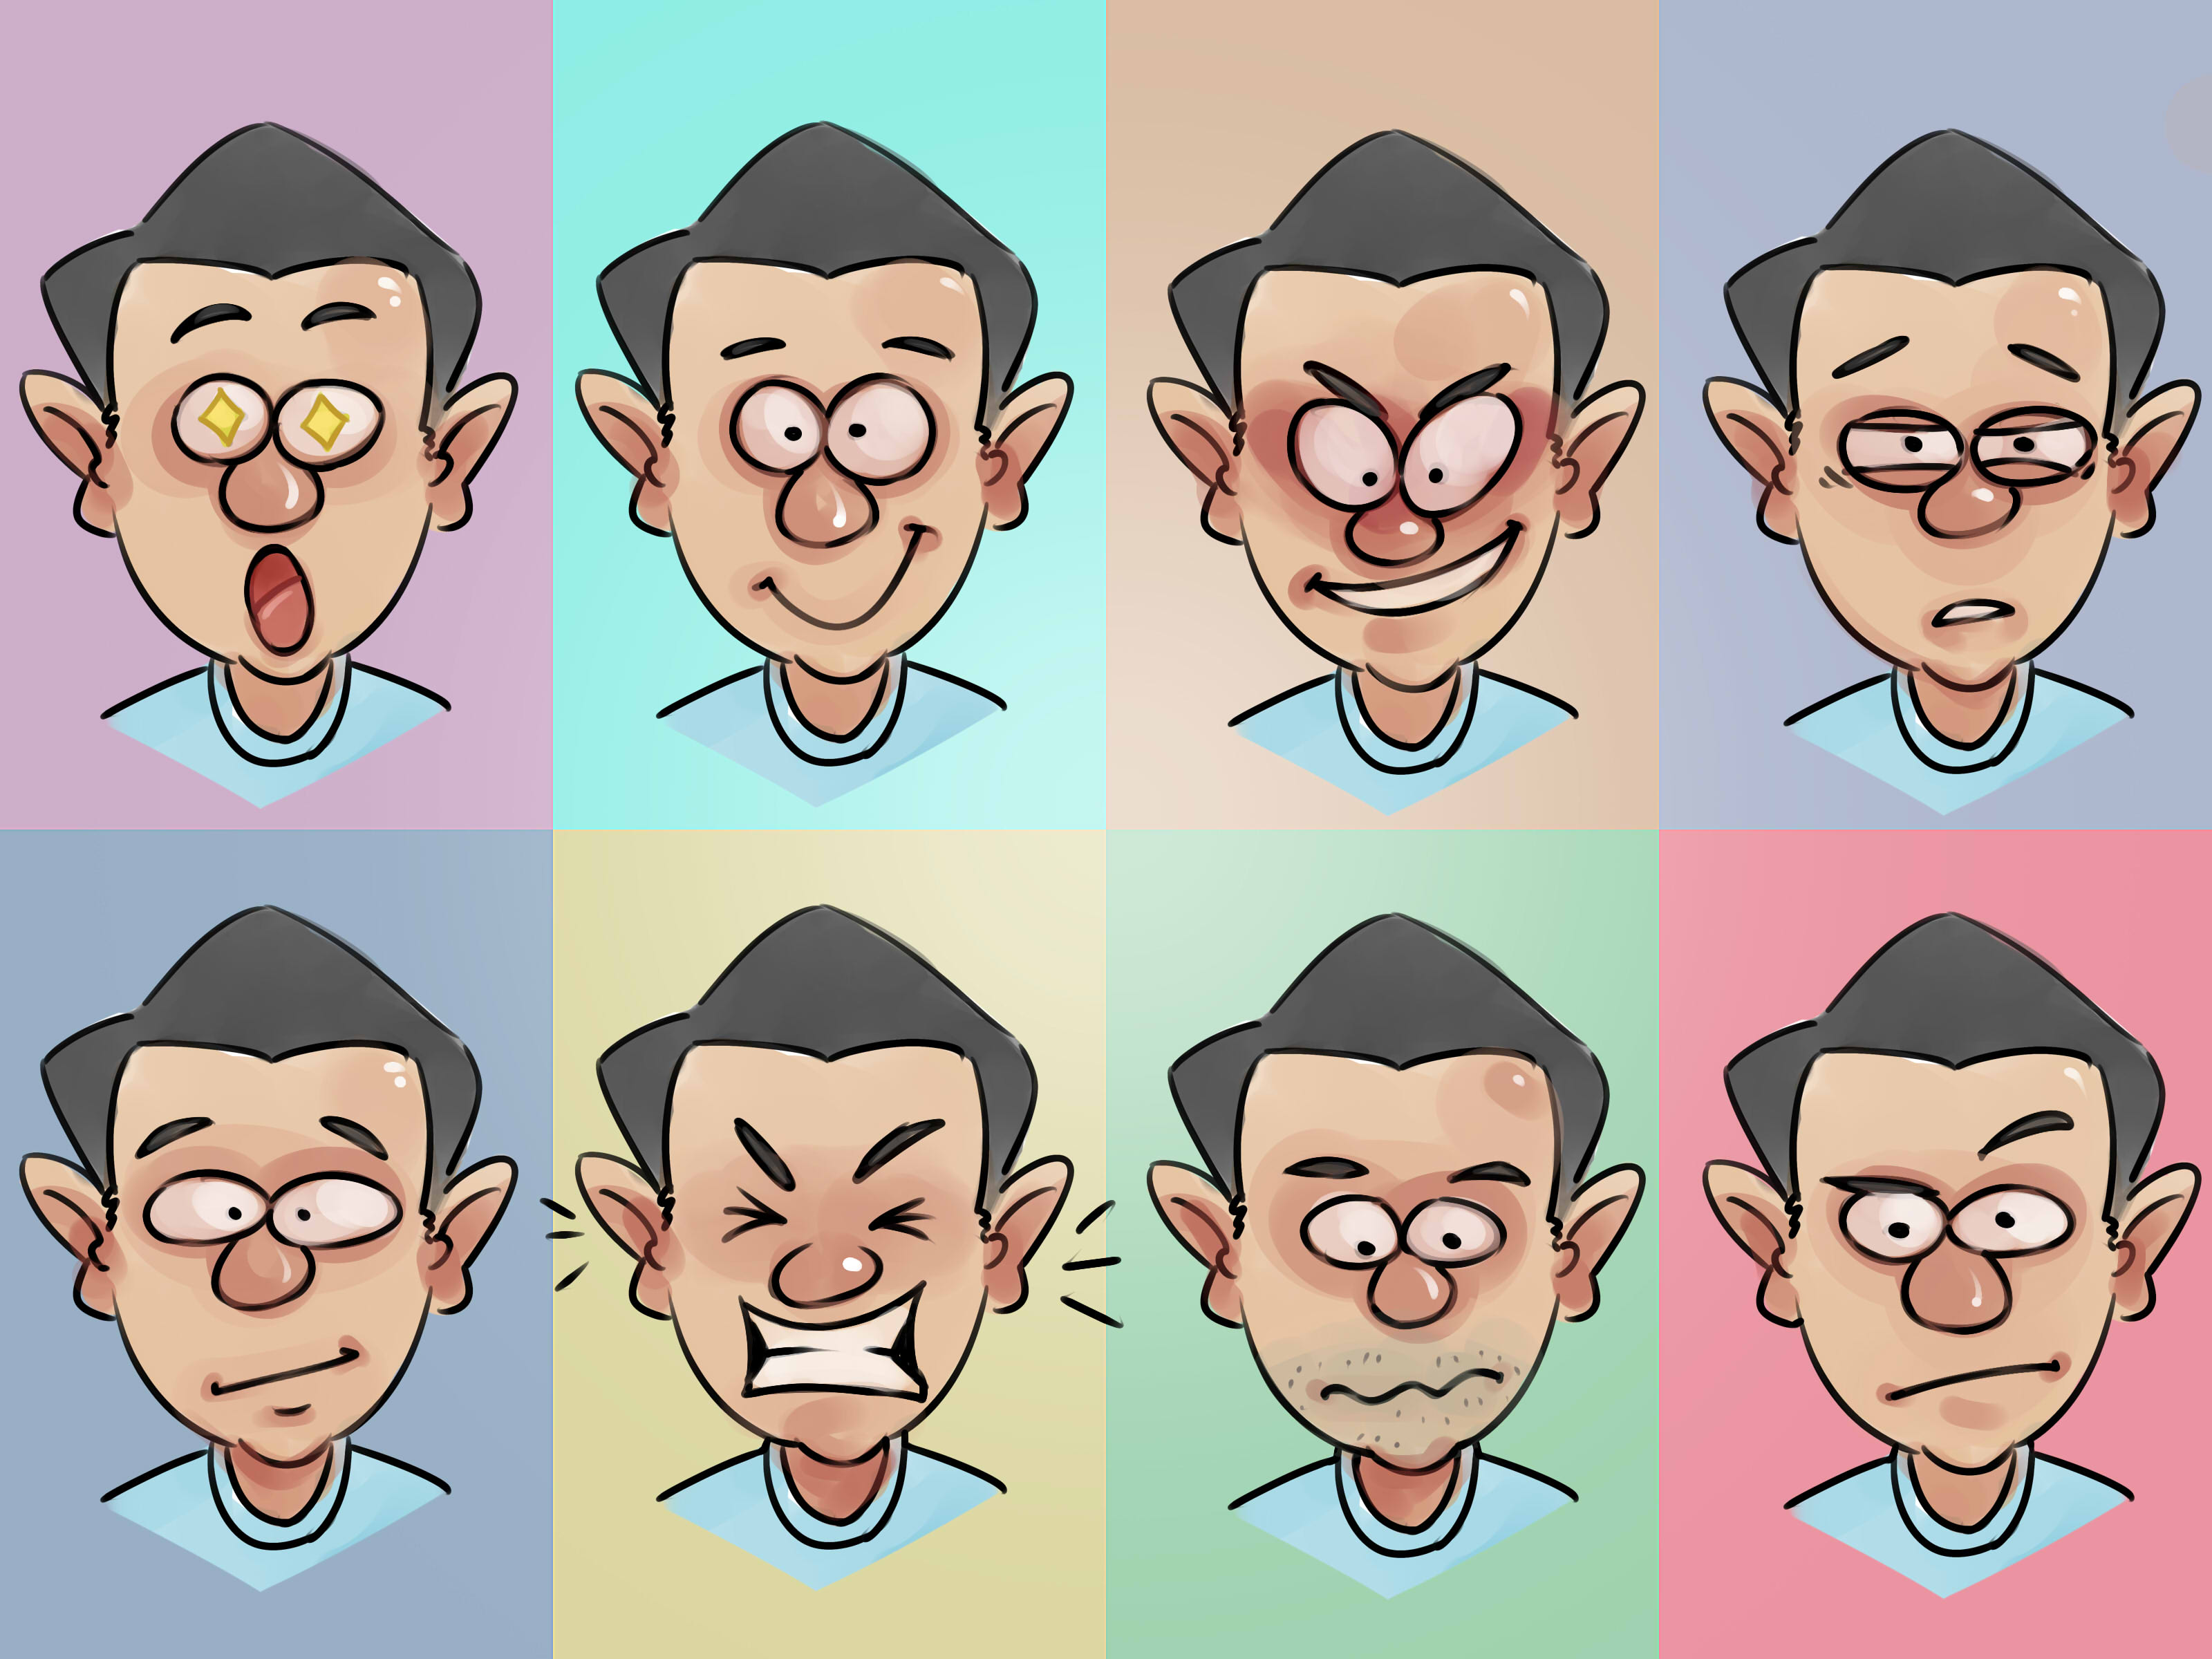 Drawing Facial Expressions - how to articles from wikiHow